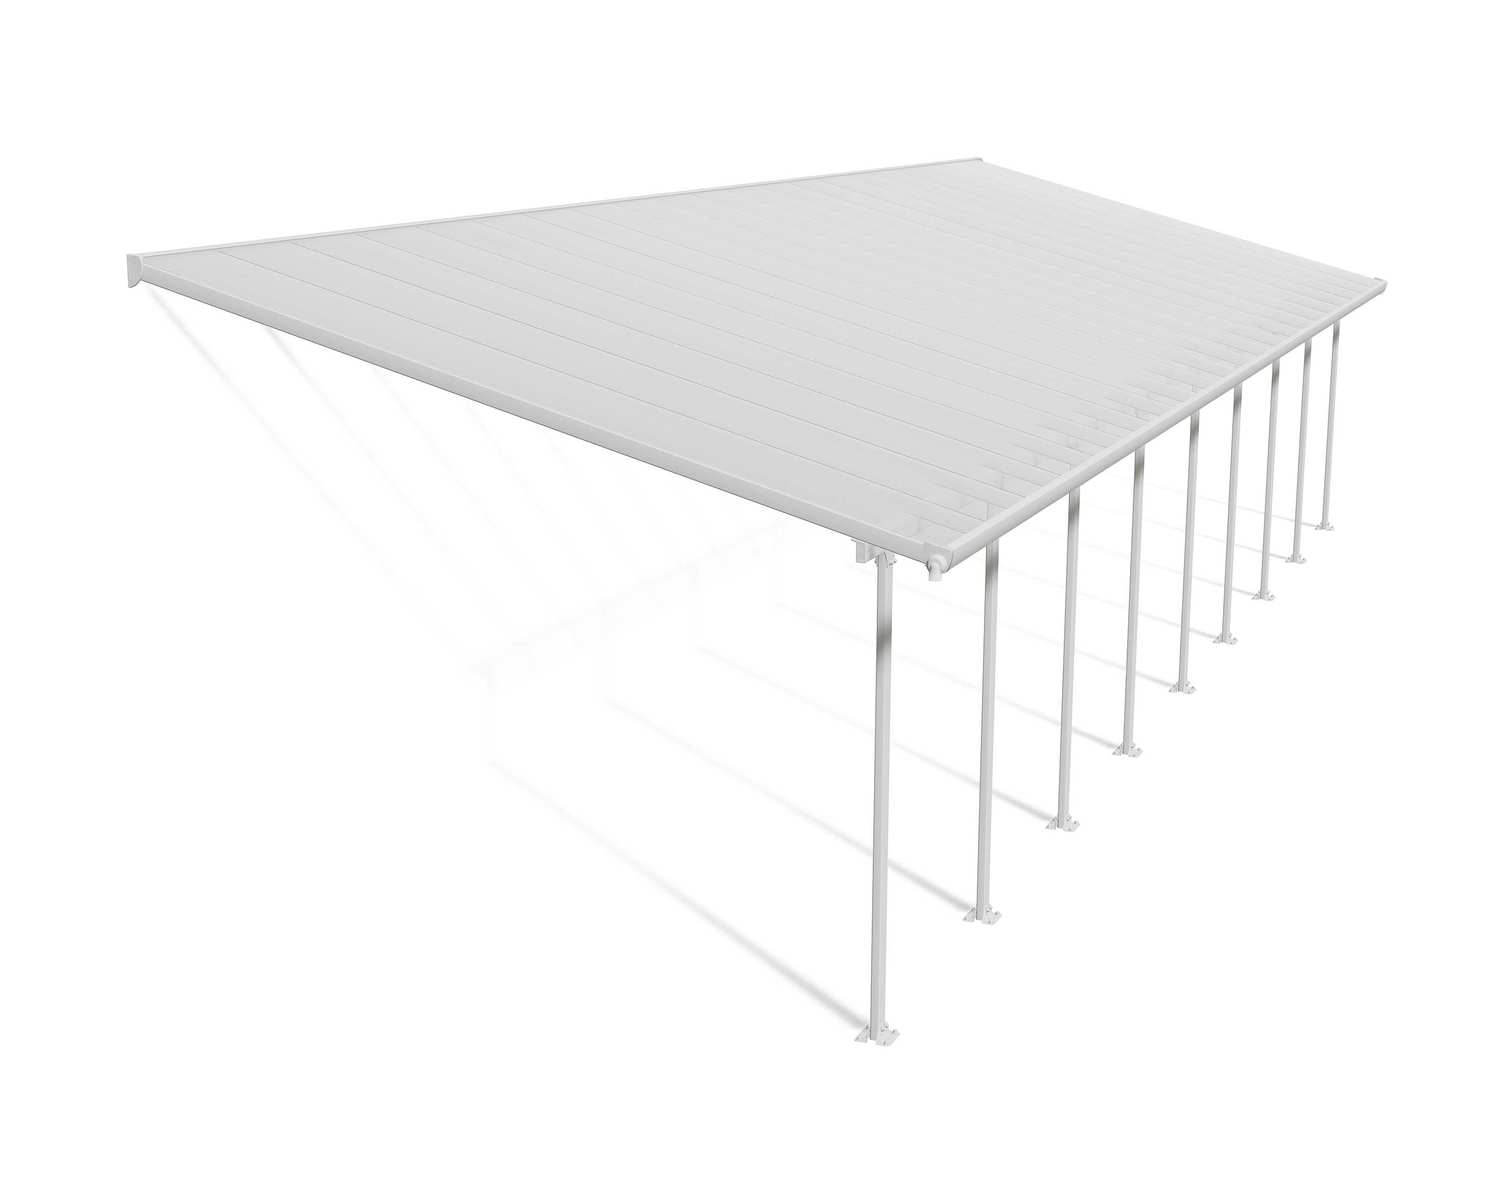 Patio Cover Kit Feria 4 ft. x 12.75 ft. White Structure & Clear Multi Wall Glazing